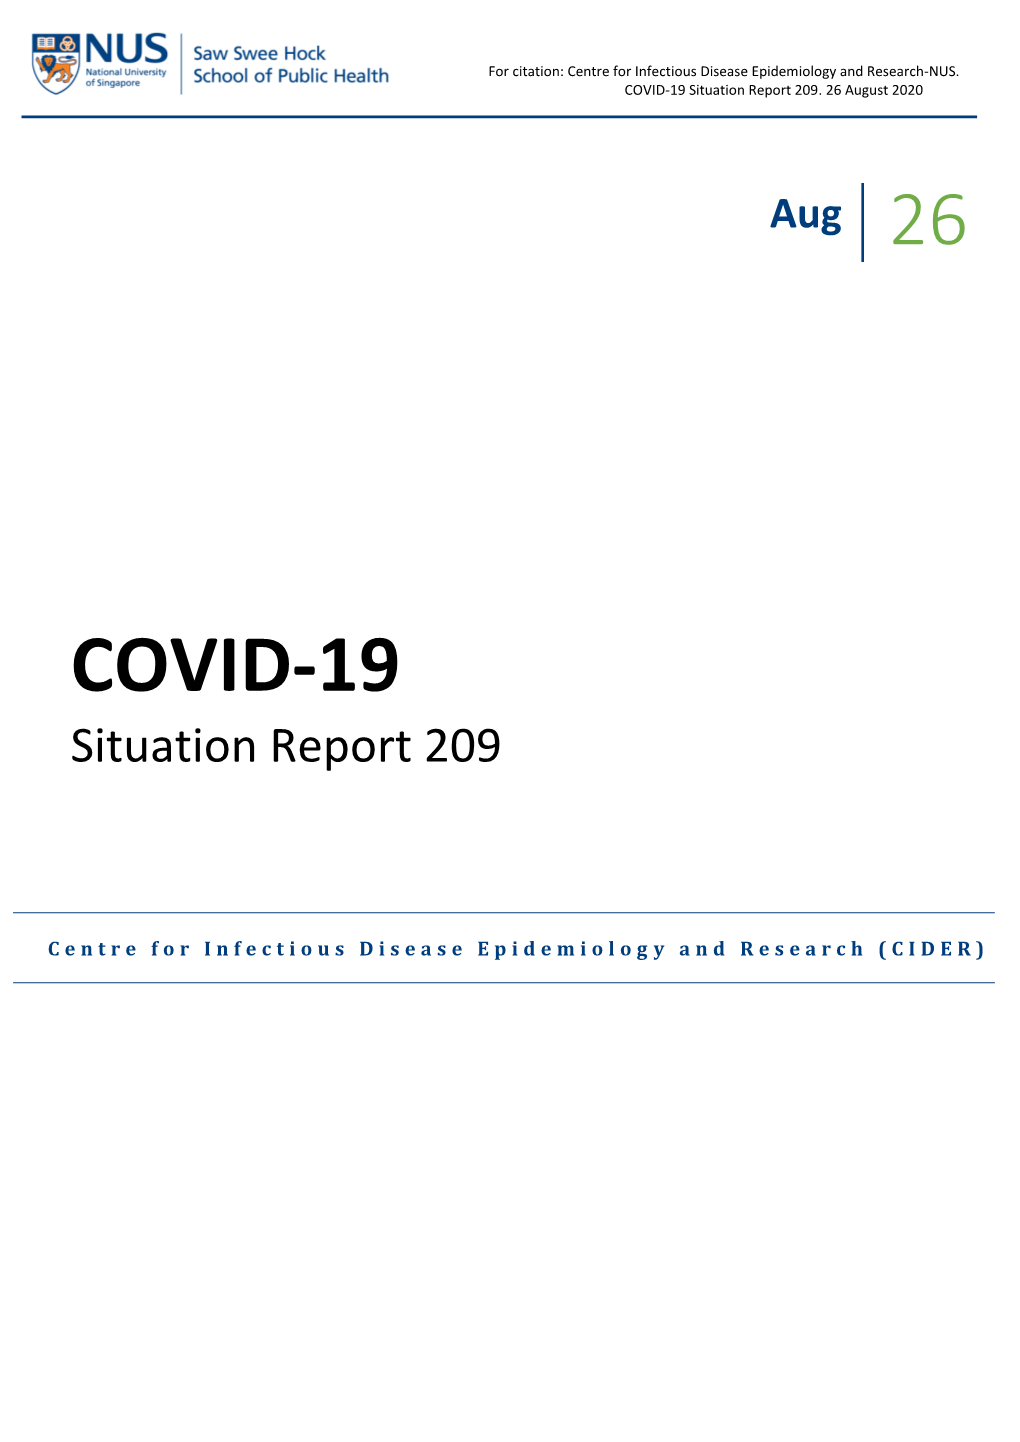 COVID-19 Situation Report 209